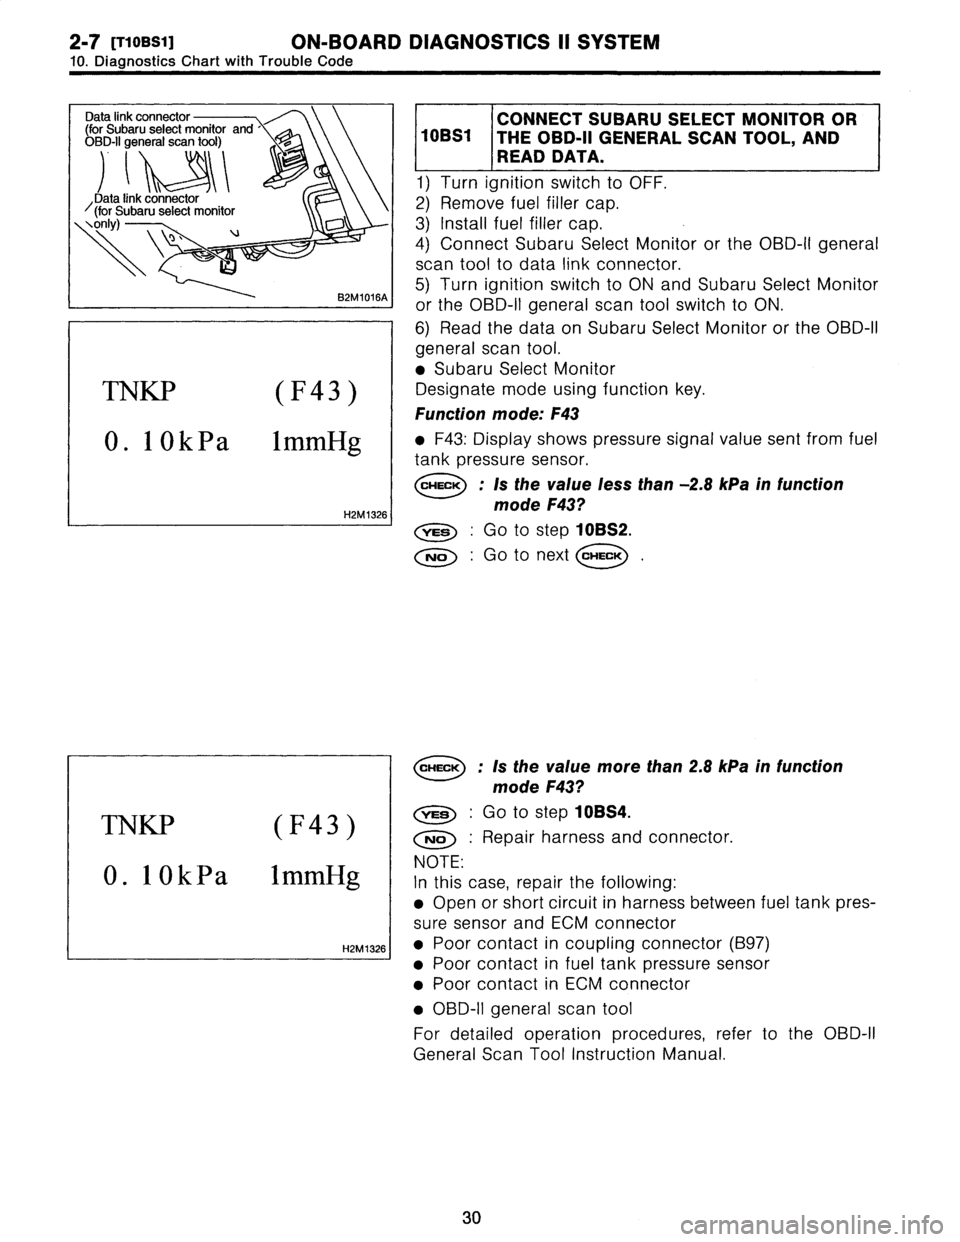 SUBARU LEGACY 1996  Service Repair Manual 2-7
[T10BS1)
ON-BOARD
DIAGNOSTICS
II
SYSTEM

10
.
Diagnostics
Chart
with
Trouble
Code

Data
link
connector
(for
Subaru
select
monitor
and
OBD-II
general
scan
tool)

)

~
~A~
~
Data
link
connector
(f